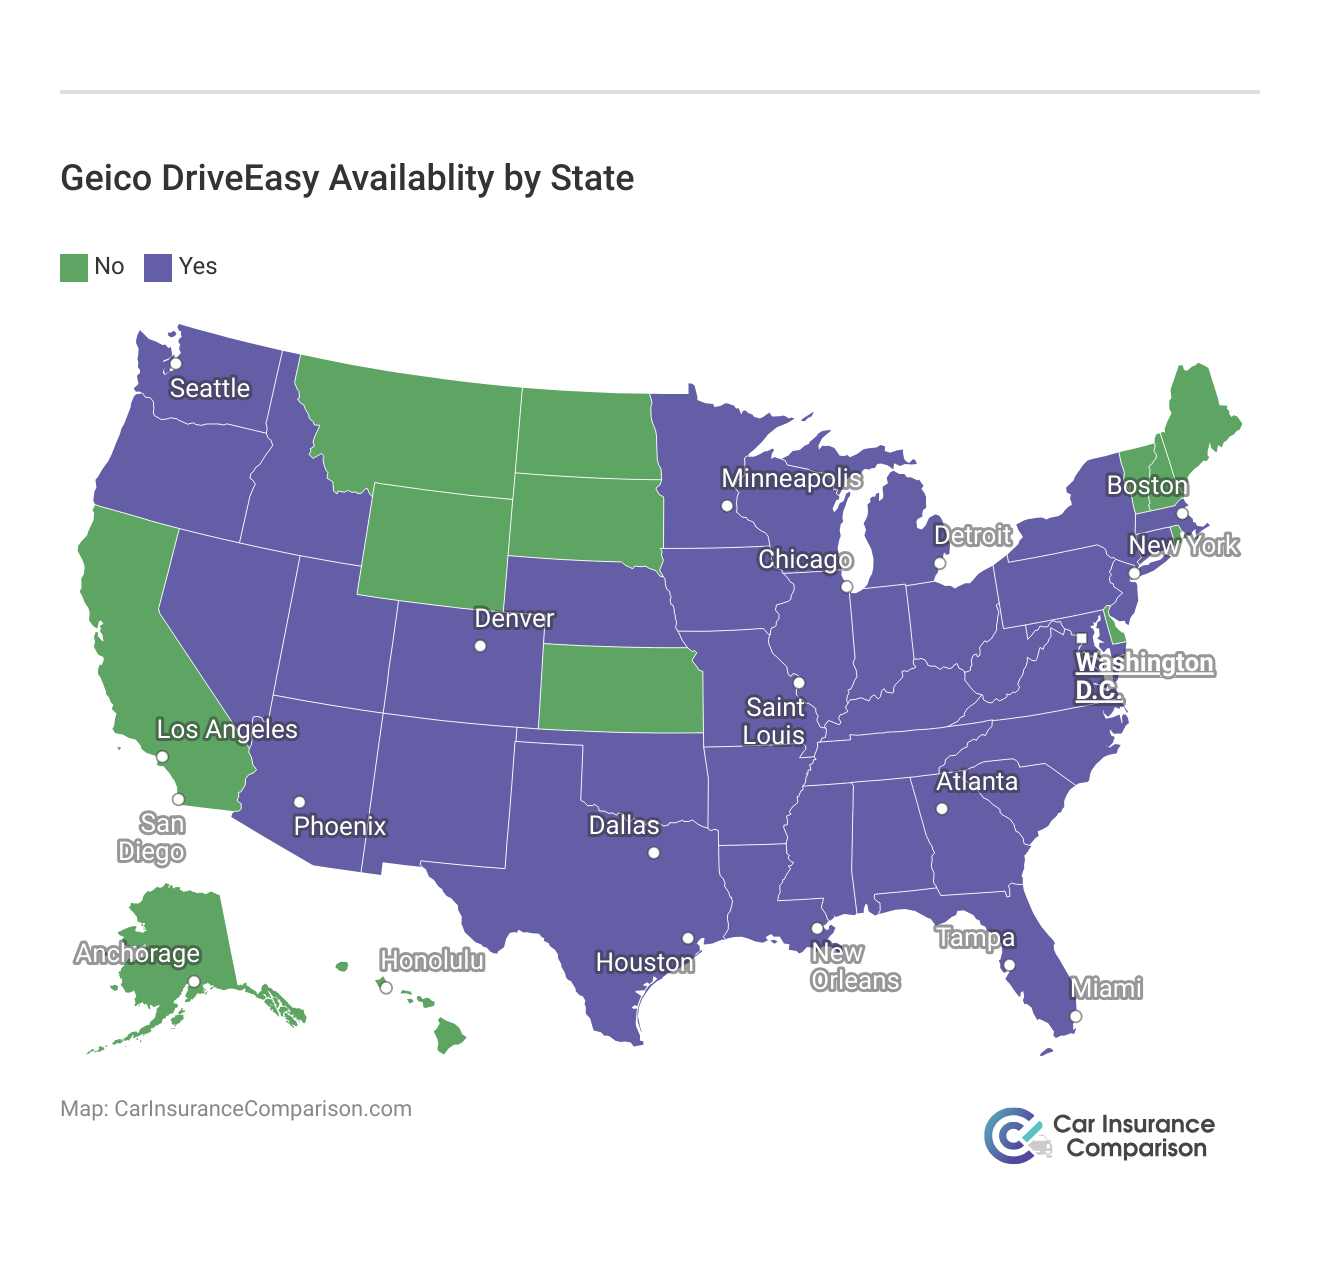 <h3>Geico DriveEasy Availablity by State</h3>